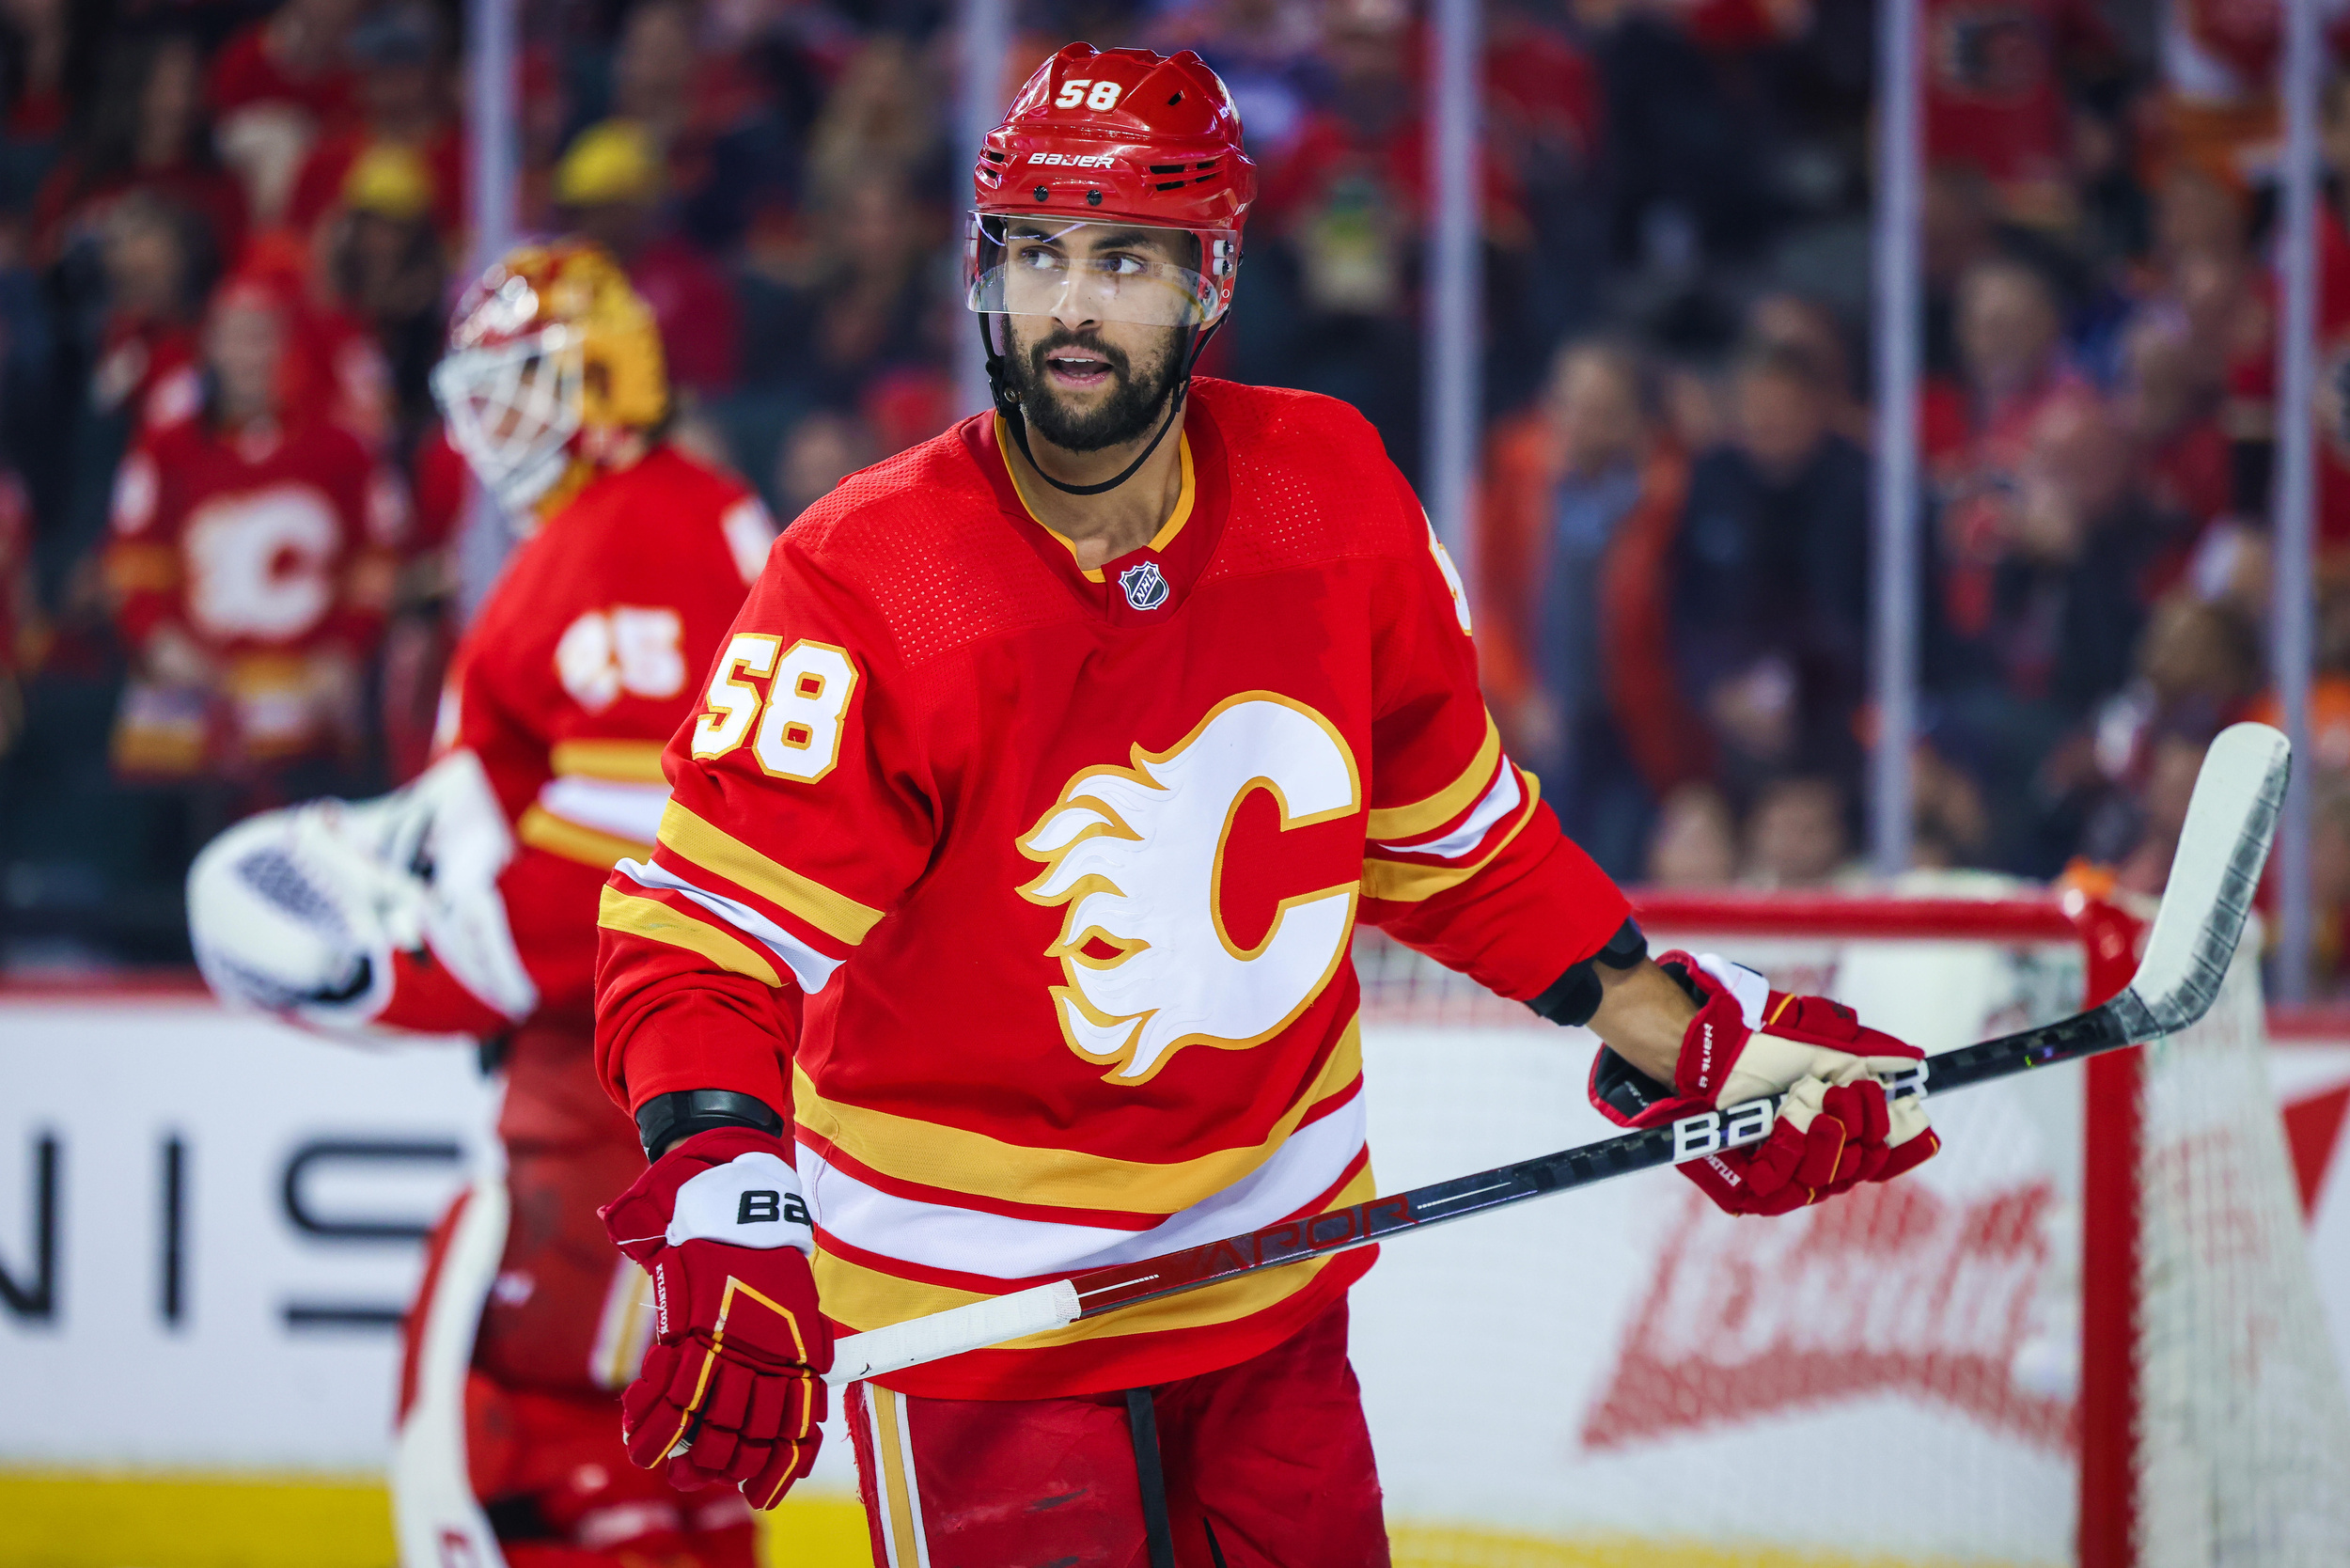 flames defenseman nears return after latest move